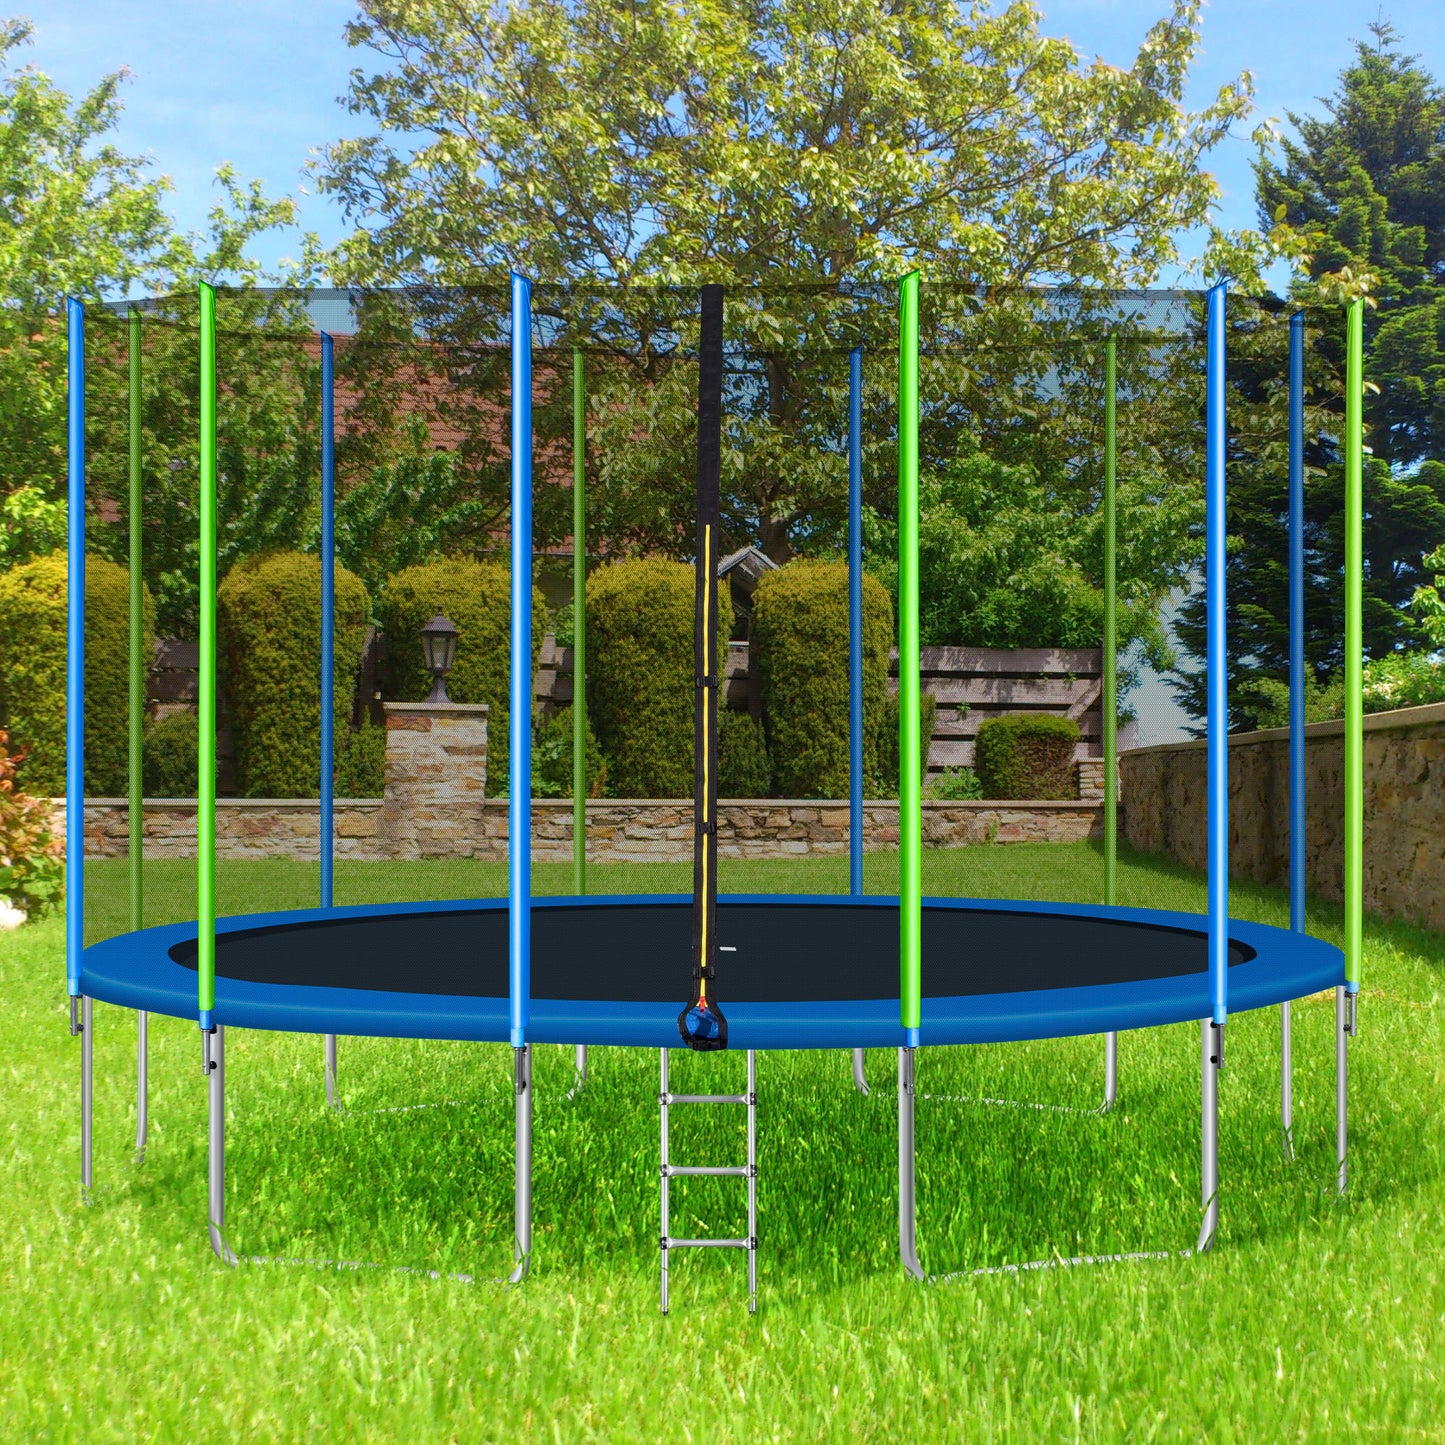 16FT Trampoline for Kids with Safety Enclosure Net, Ladder and 12 Wind Stakes, Round Outdoor Recreational Trampoline